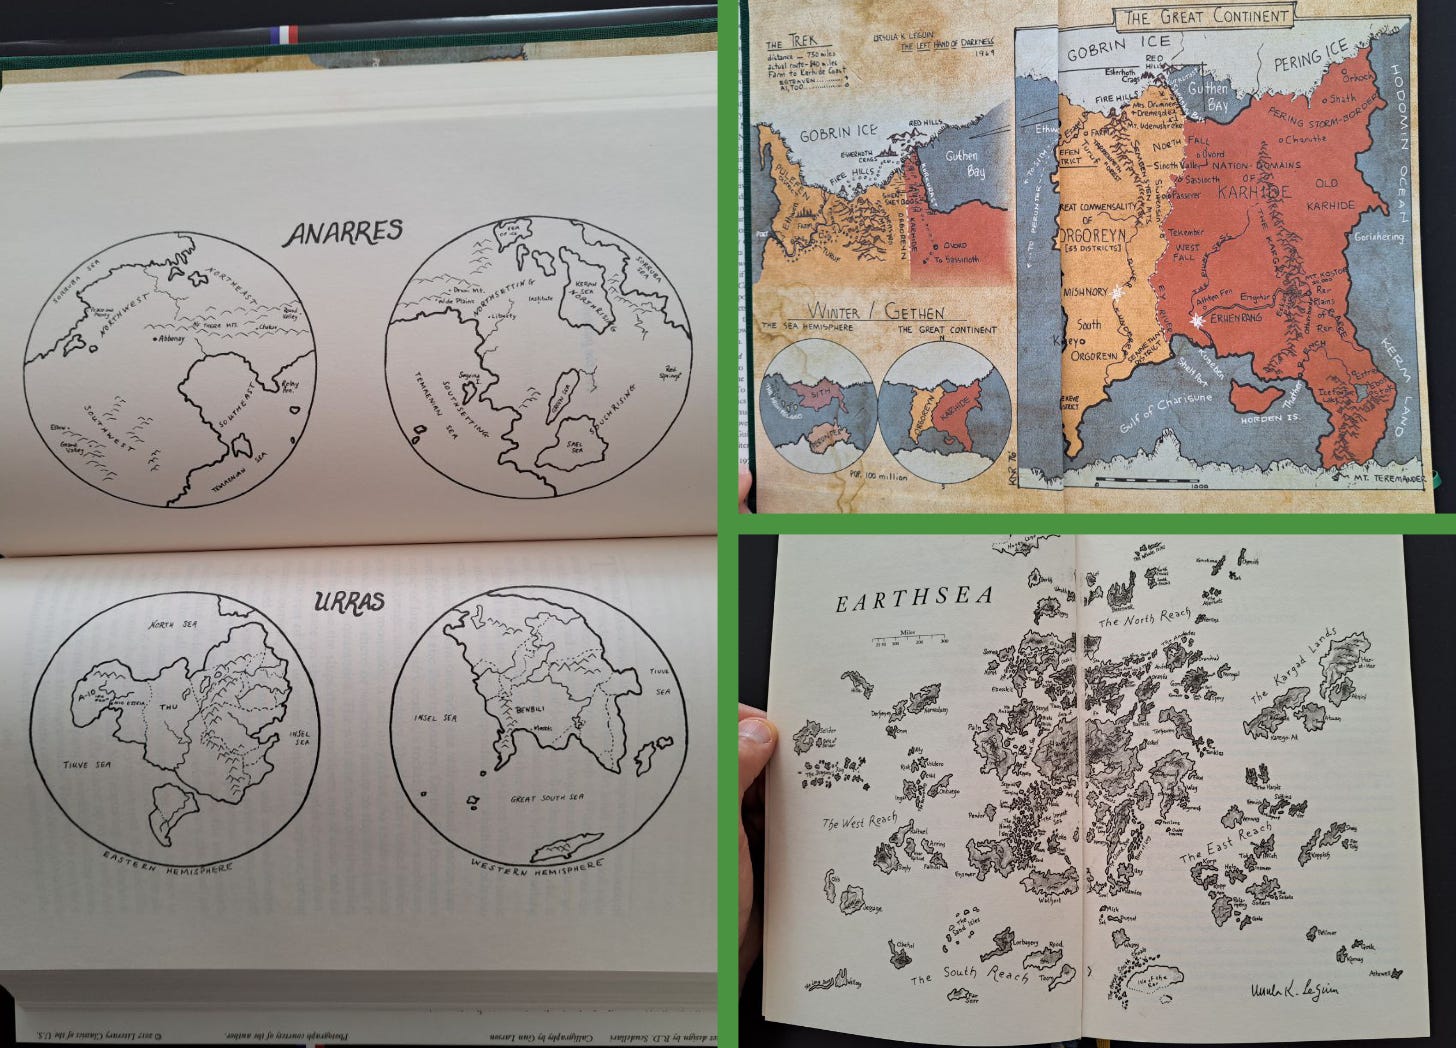 Three photographs of planetary maps included in Le Guin’s work, Gethen, Anarres, Urras, and Earthsea.